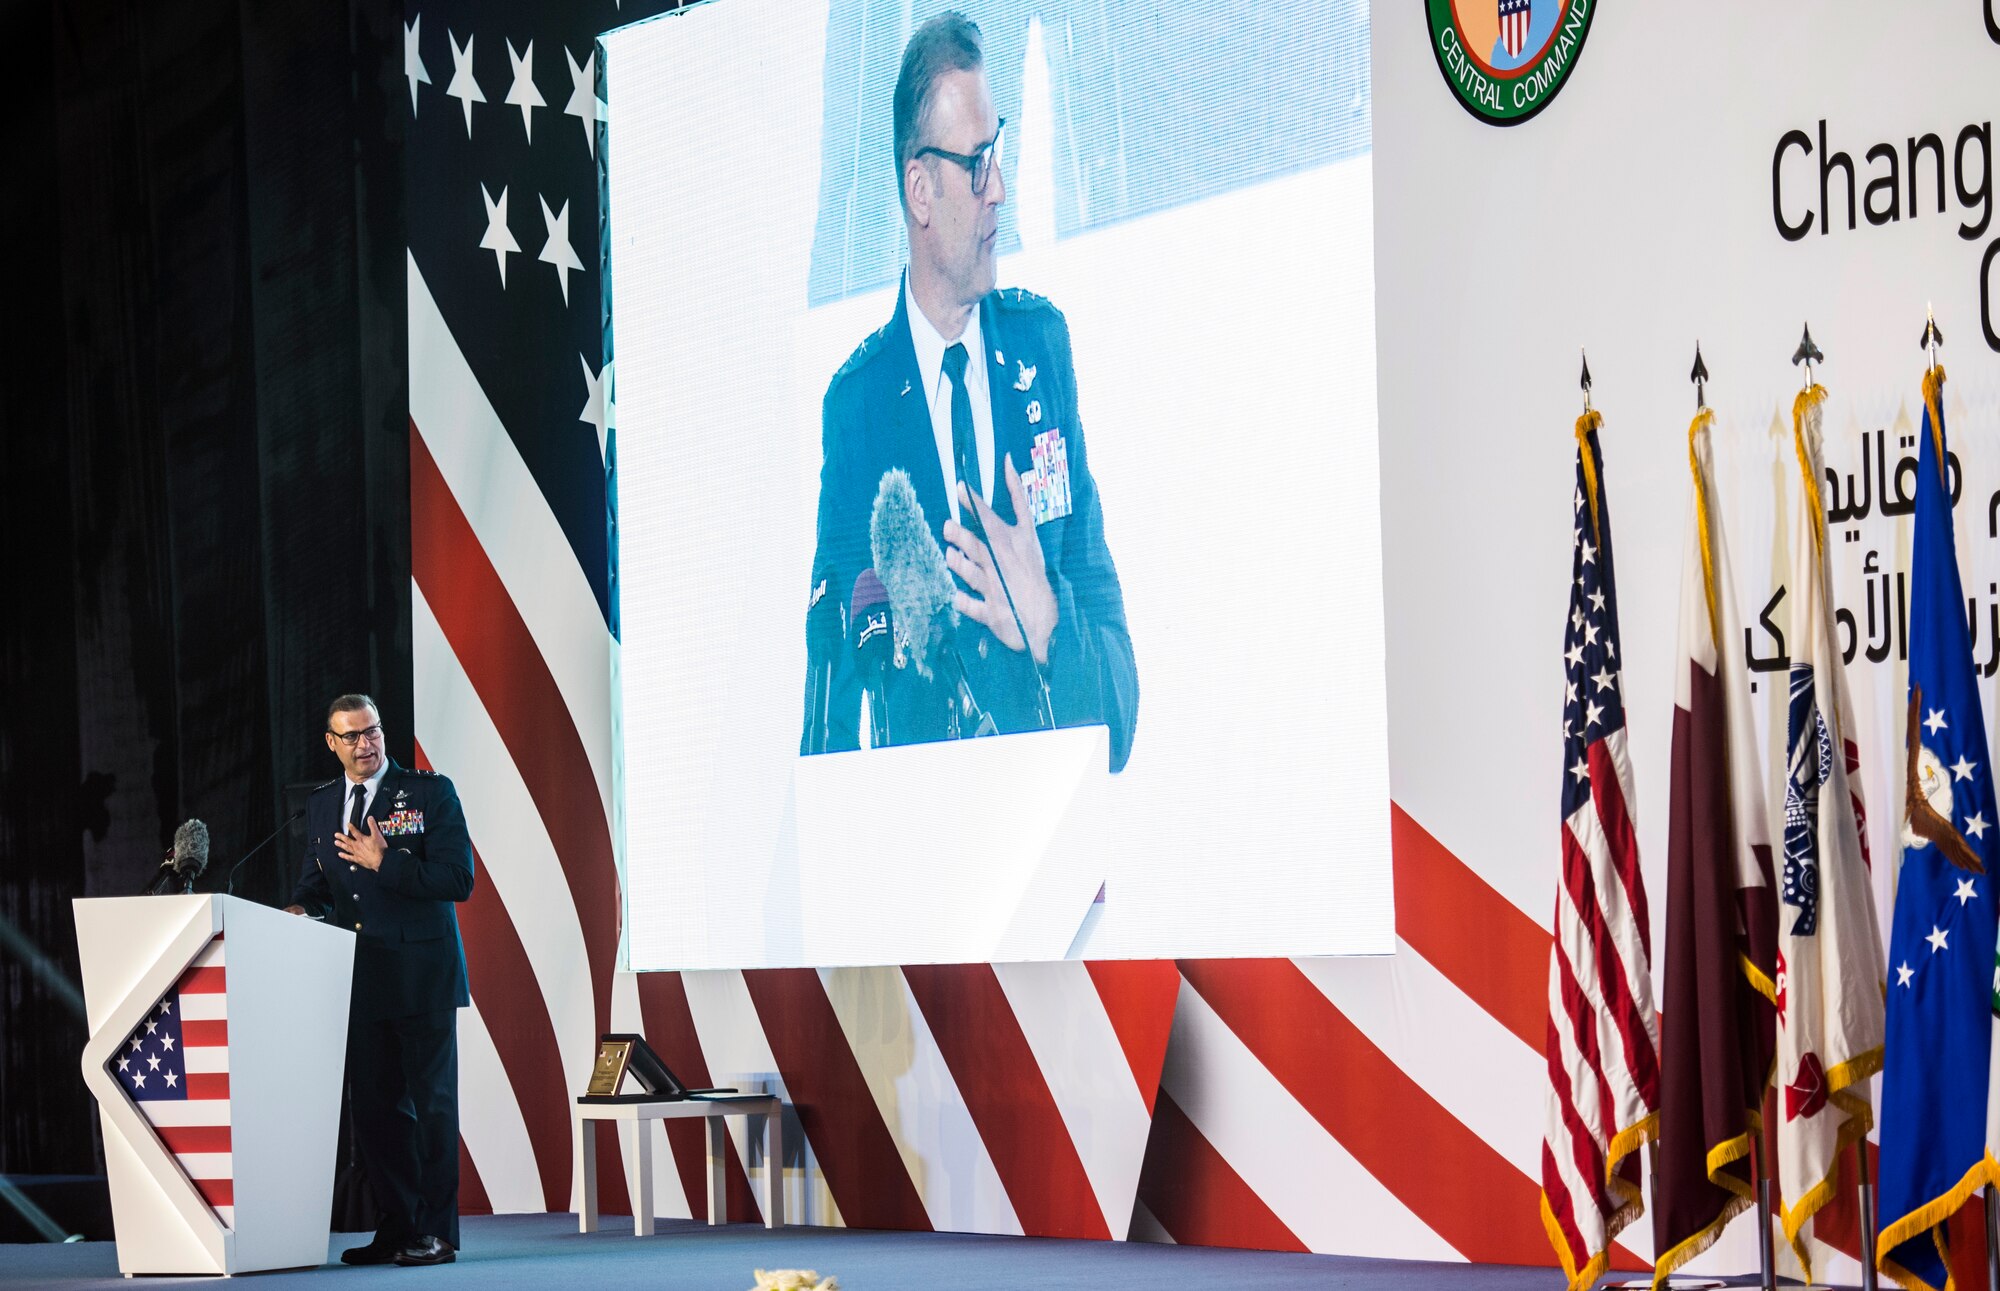 U.S. Air Force Lt. Gen. Joseph T. Guastella Jr., Commander of U.S. Air Forces Central Command (AFCENT), speaks to attendees at a change of command ceremony at Al Udeid Air Base, Qatar, Aug. 30, 2018. Guastella is a command pilot and has accumulated more than 4,000 flying hours, including 1,000 combat hours in the F-16C/D and the A-10C. AFCENT is headquarters at Shaw Air Force Base, South Carolina, and has a forward headquarters at Al Udeid Air Base Qatar. As the air unilaterally or in concert with coalition partners, and for developing contingency plans in support of national objectives for CENTCOM’s 20-nation AOR in Southwest Asia. (U.S. Air Force photo by Staff Sgt. Keith James)